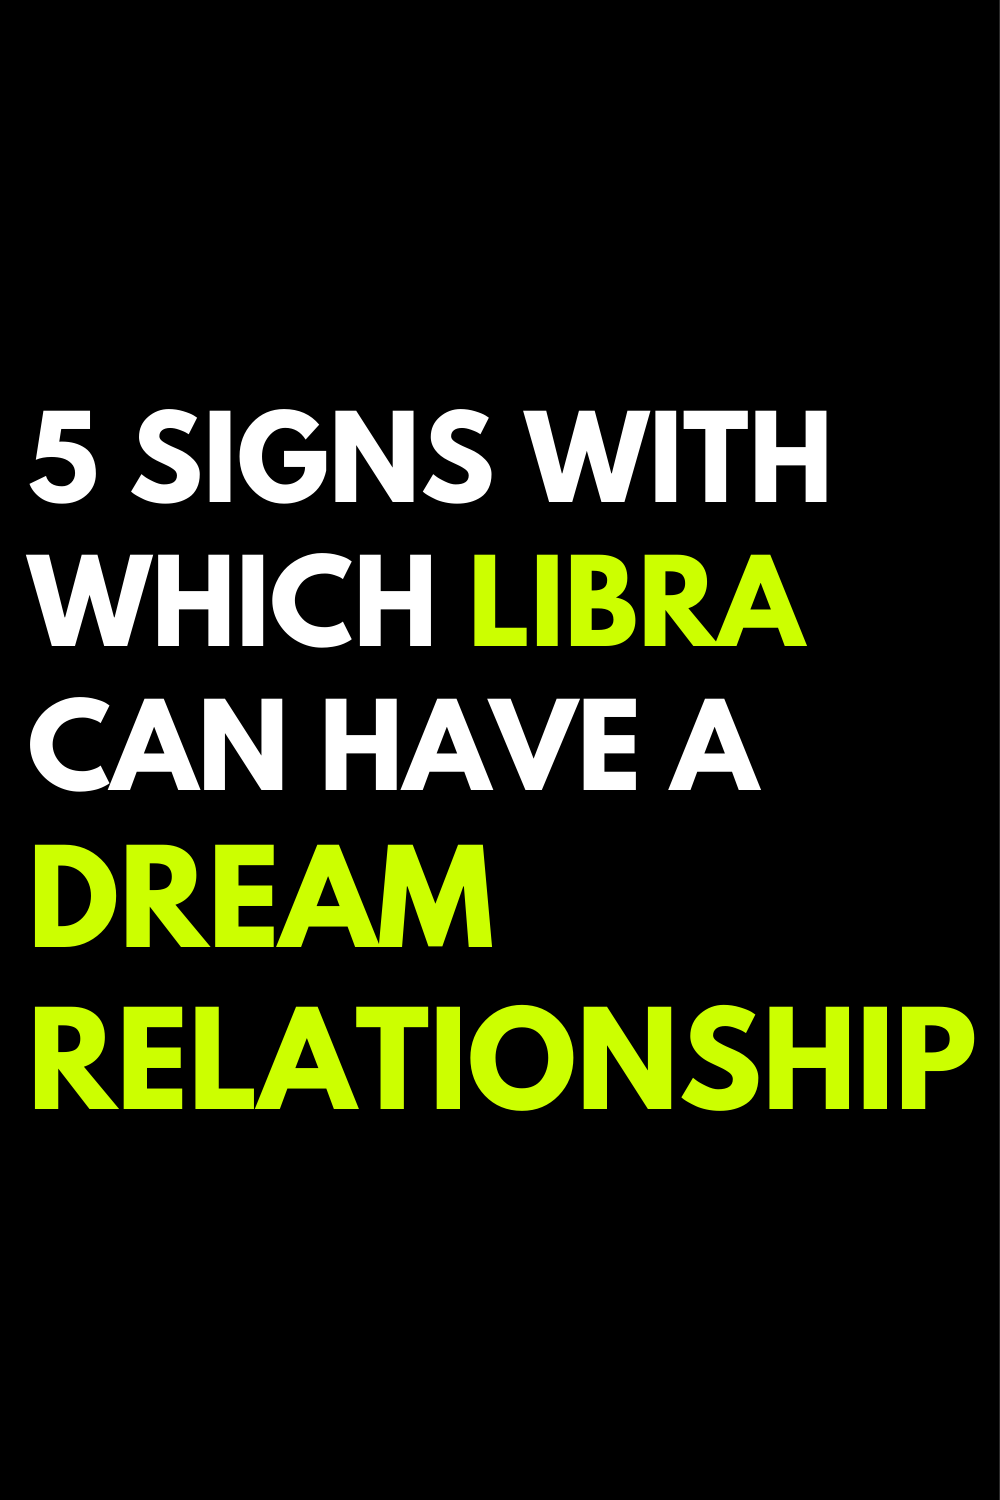 5 signs with which Libra can have a dream relationship